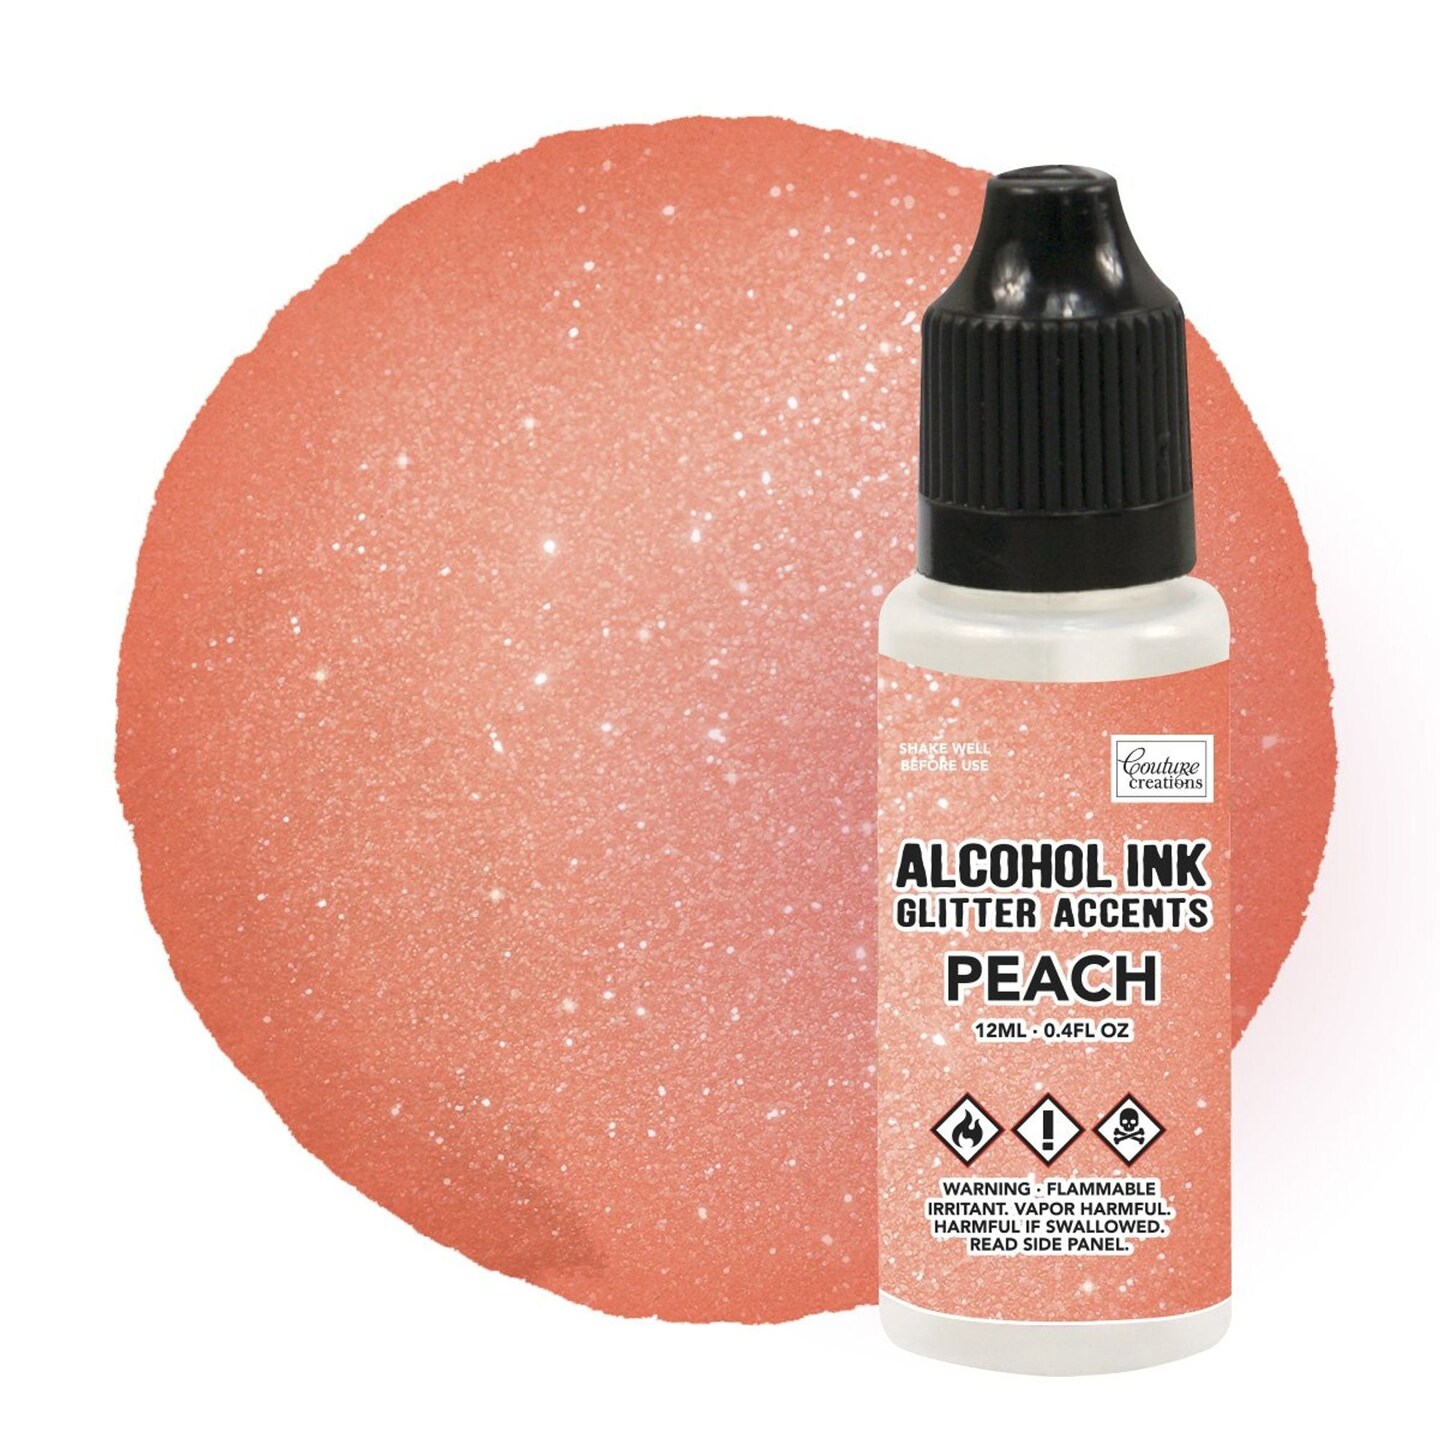 Couture Creations Glitter Accents Alcohol Ink 12mL | 0.4fl oz - Pumpkin